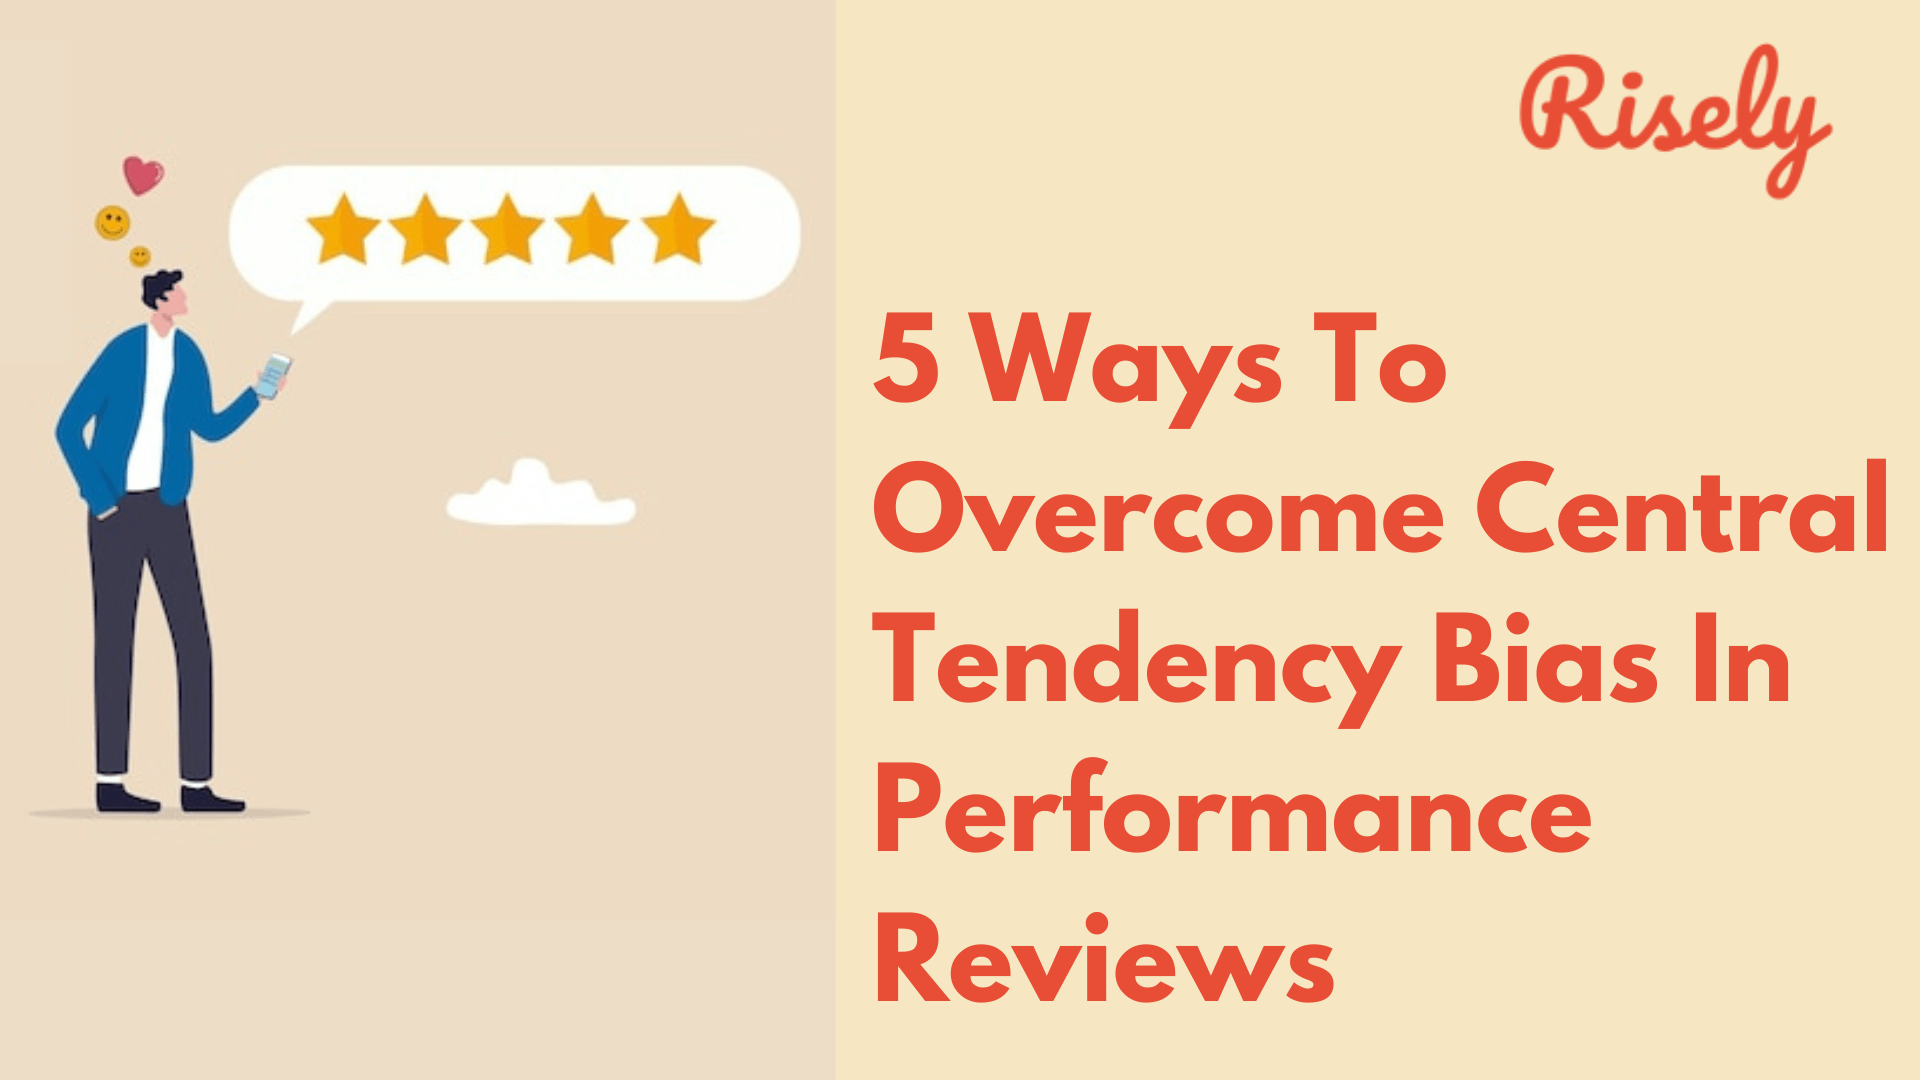 5 Ways To Overcome Central Tendency Bias In Performance Reviews 